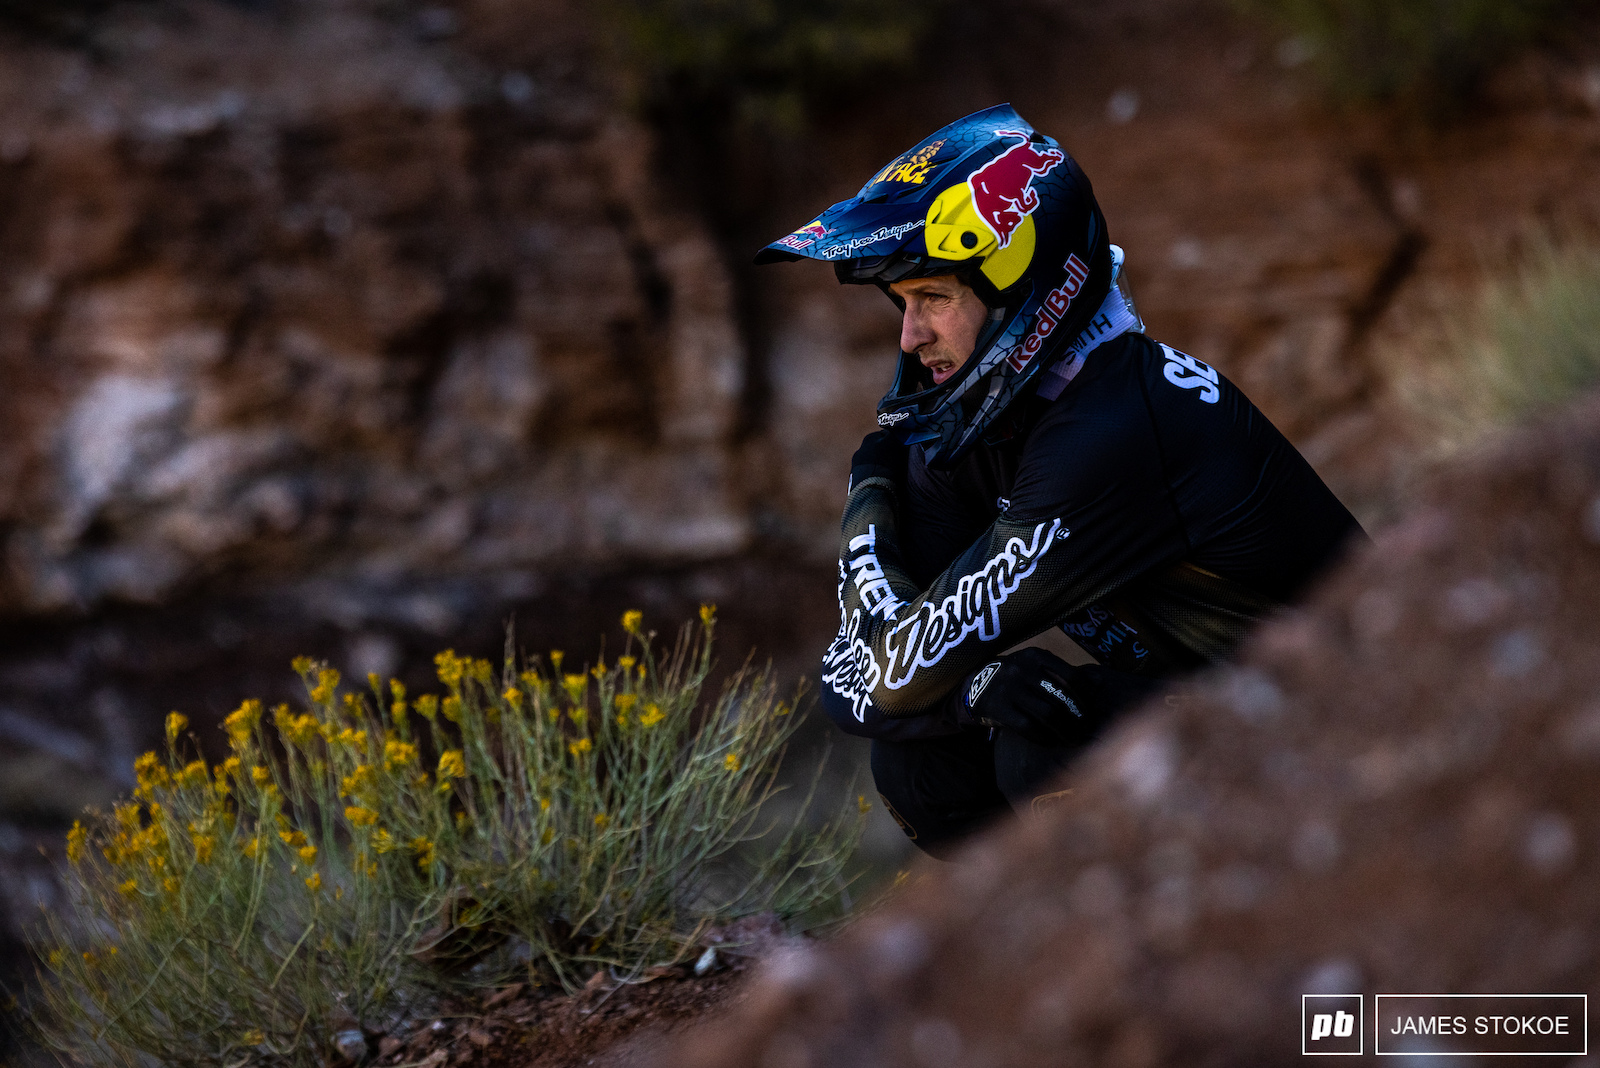 It doesn t matter if you re one of the most recognizable and talented mountain bike athletes on the planet or a first-year grom - Rampage takes not only an amazing rider but also takes the ability to prepare mentally for what is about to come.